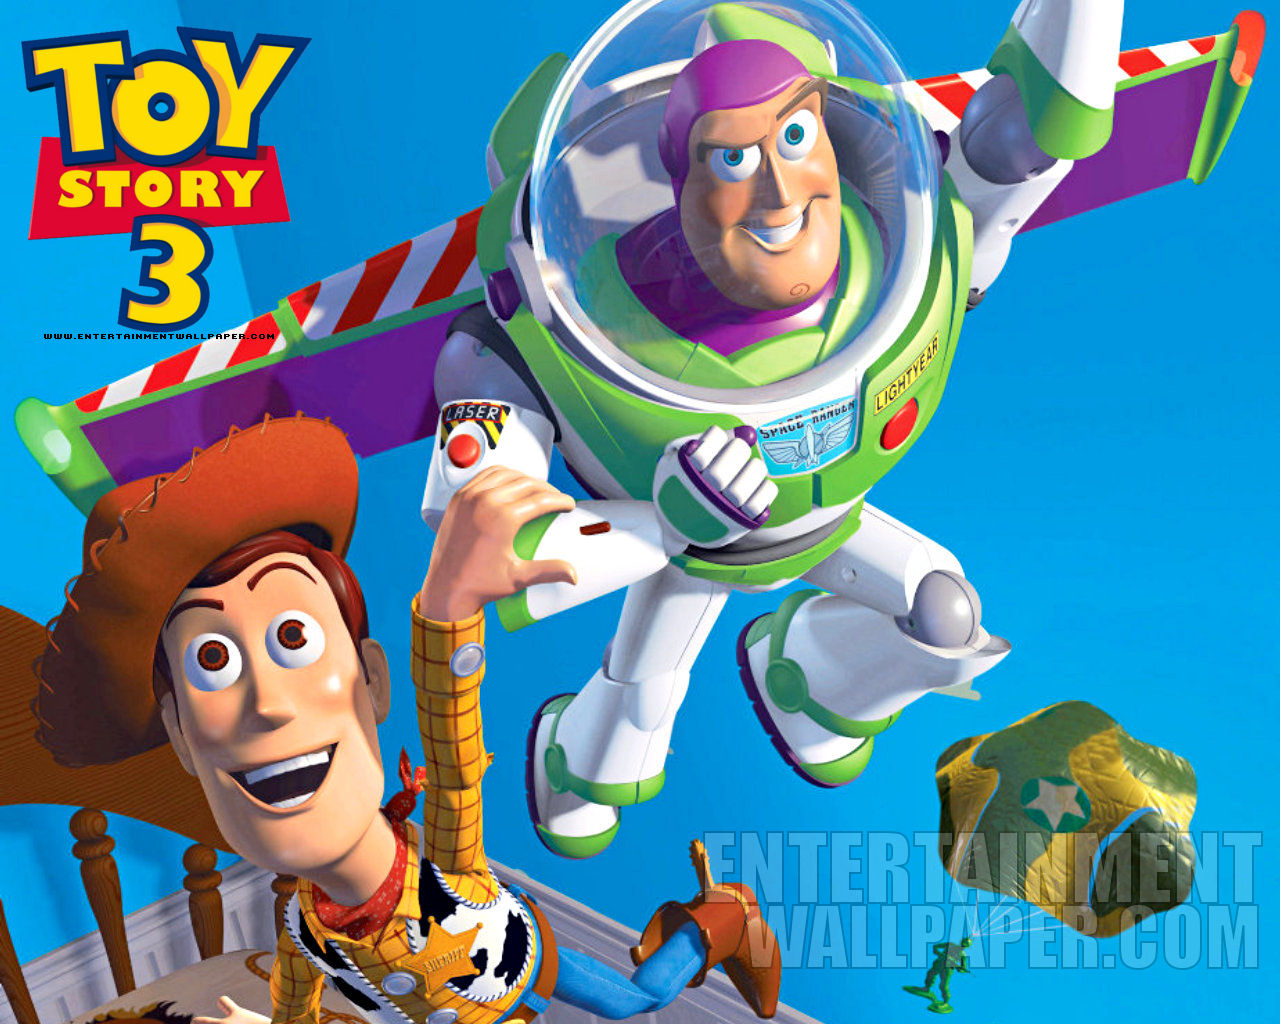 Download this Toy Story picture